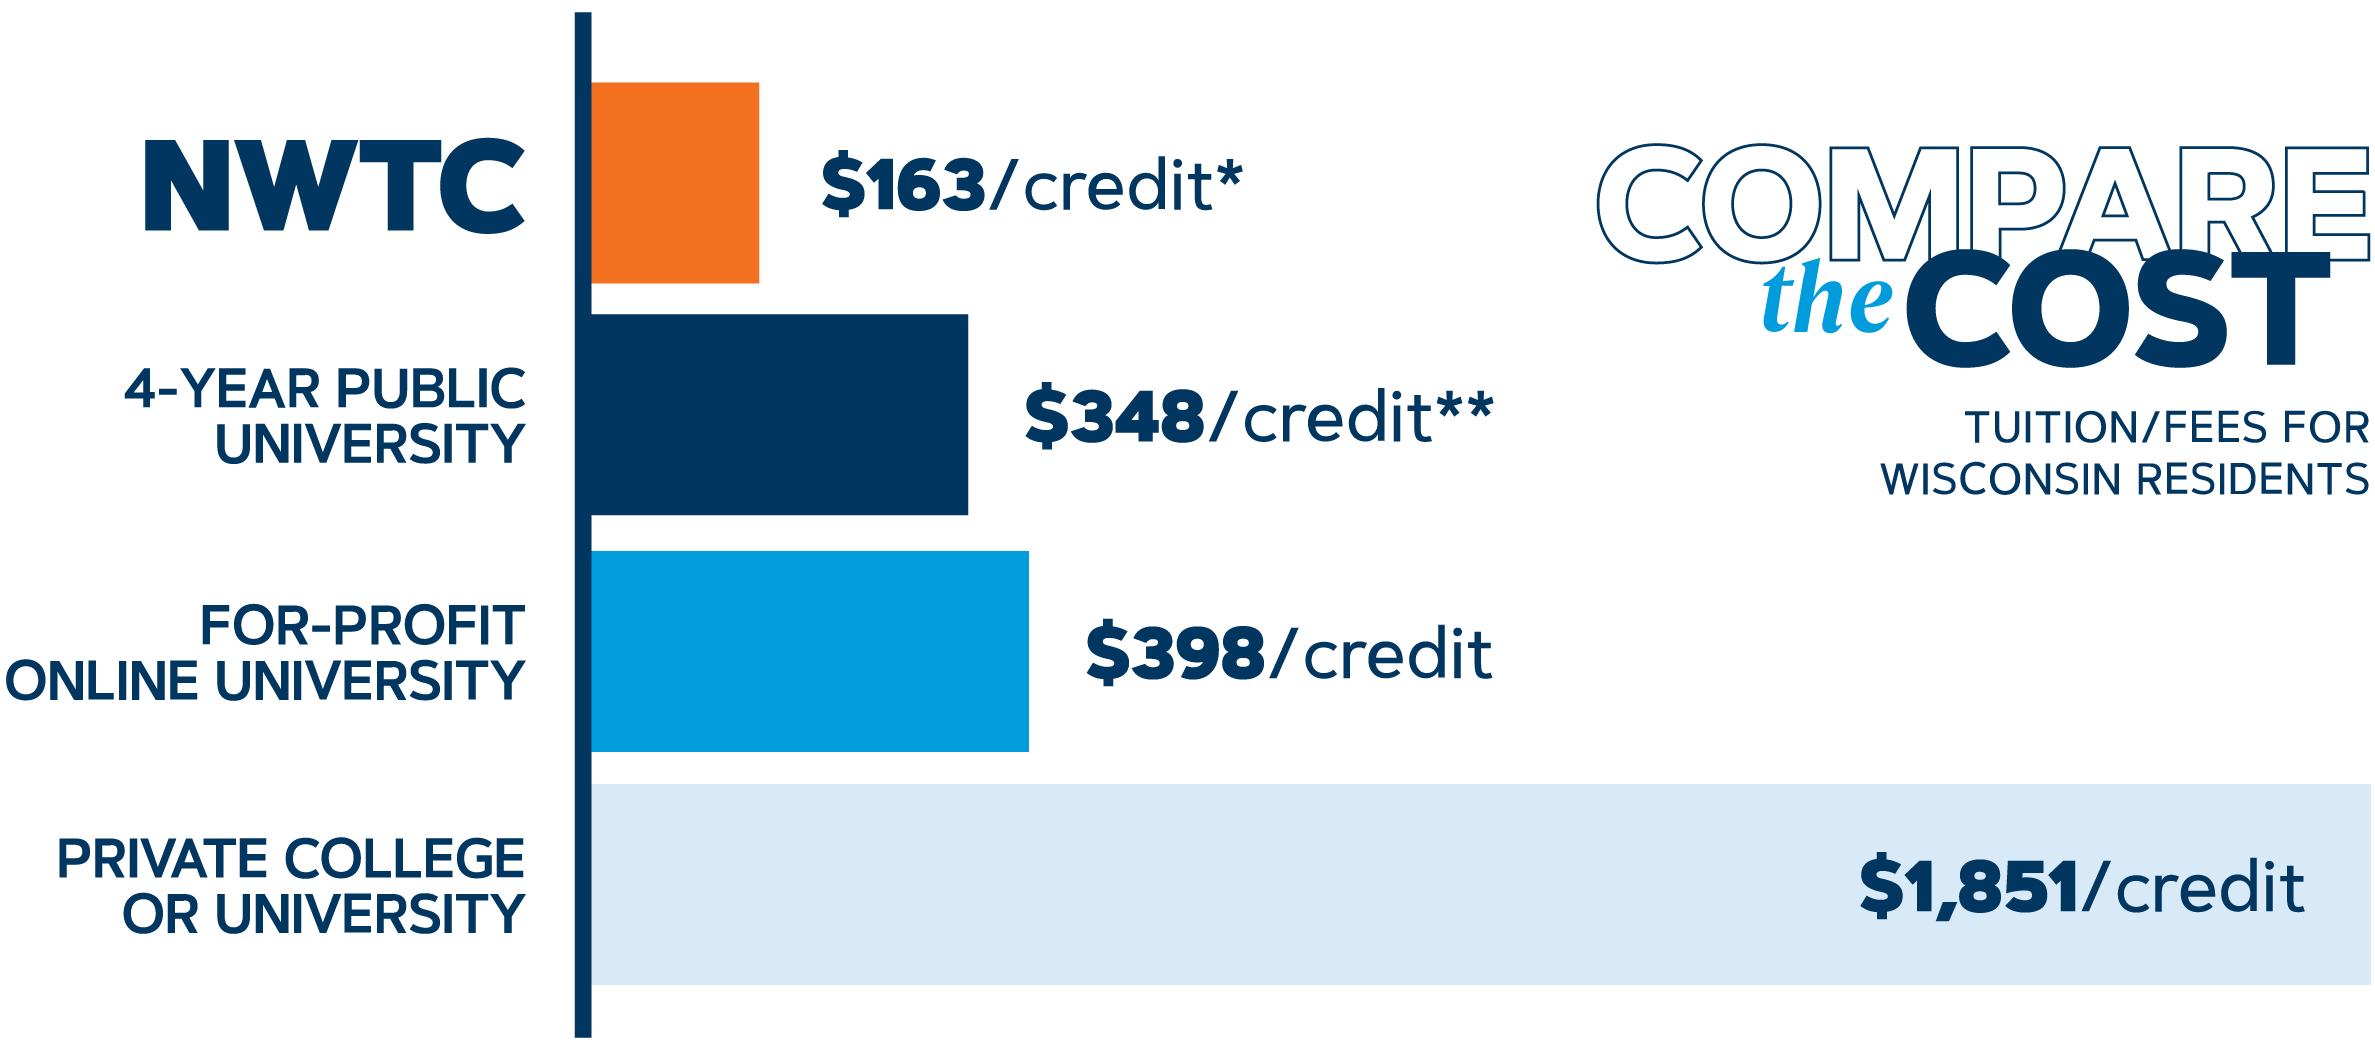 Compare the Cost: Tuition and Fees for Wisconsin Residents. NWTC = $163 per credit*; 4-year Public University = $348 per credit**; For-Profit Online University = $398 per credit; Private College or University = $1851 per credit